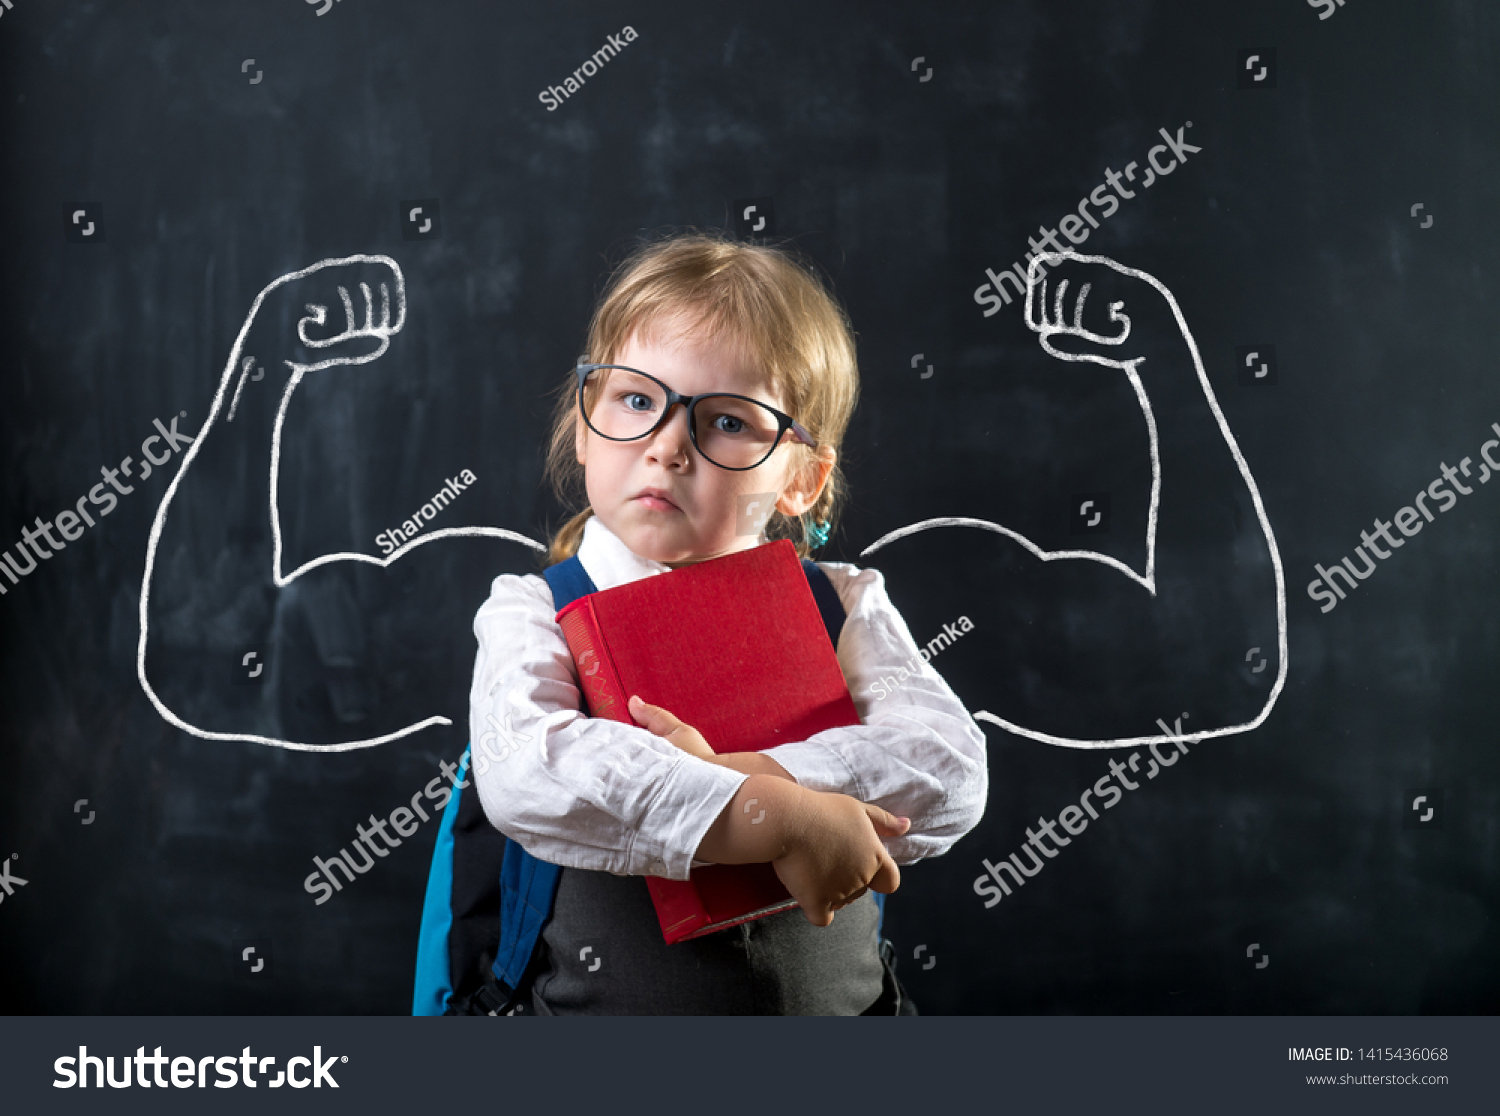 Cute child girl in school uniform and glasses. Go to school for the first time. Child with school bag and book. Kid in class room near chalkboard with muscles on it. Back to school #1415436068